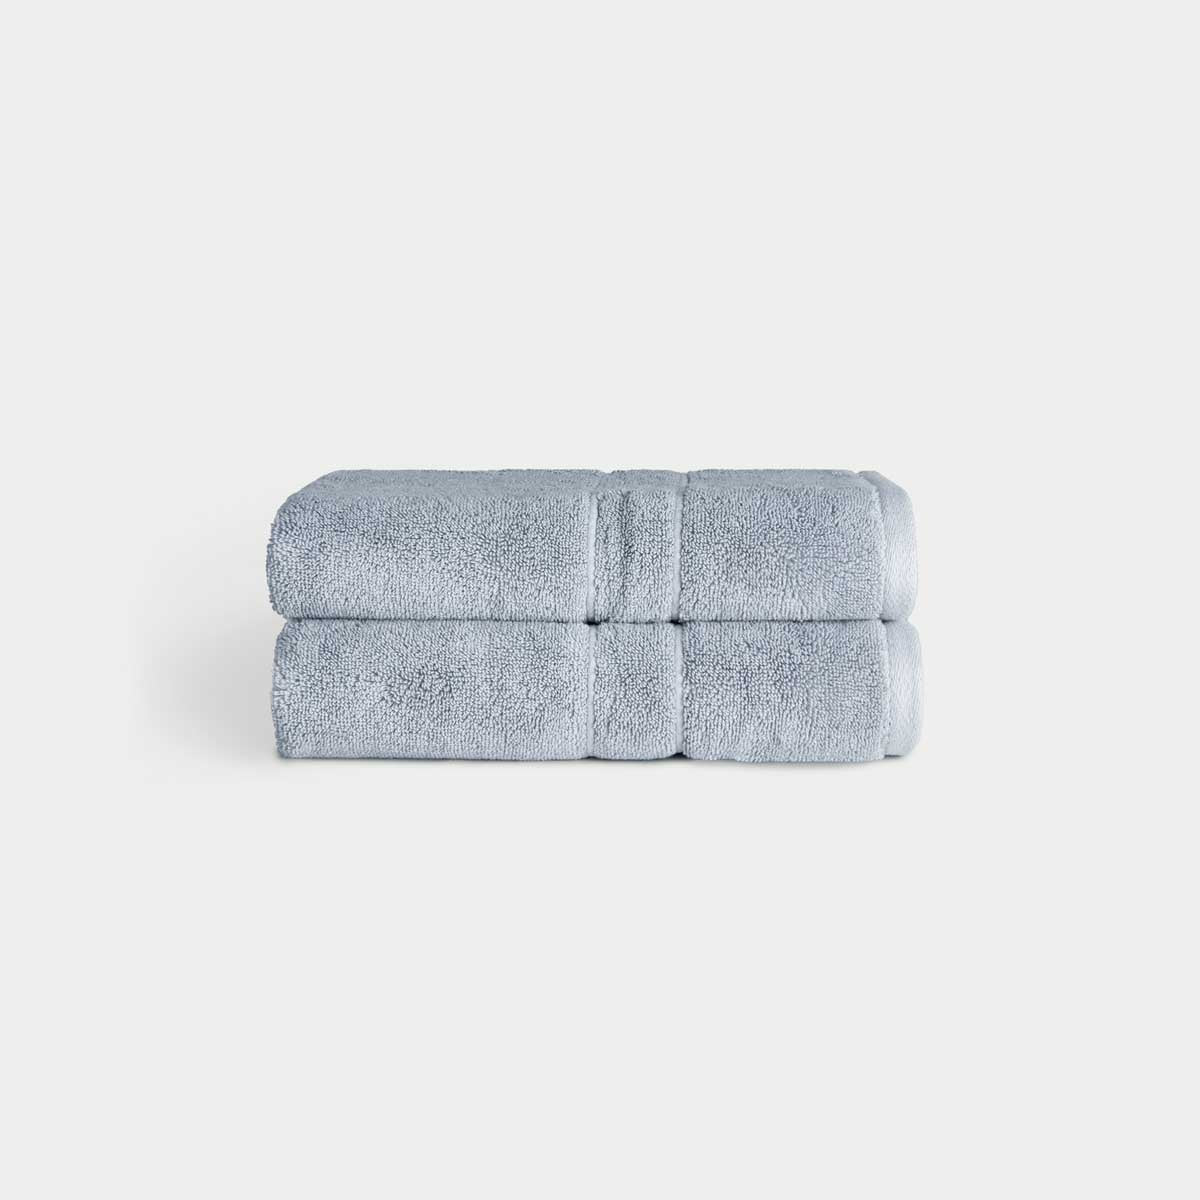 Premium Plush Hand Towels in the color Harbor Mist. Photo of Complete Premium Plush Hand Towel taken with white background |Color:Harbor Mist